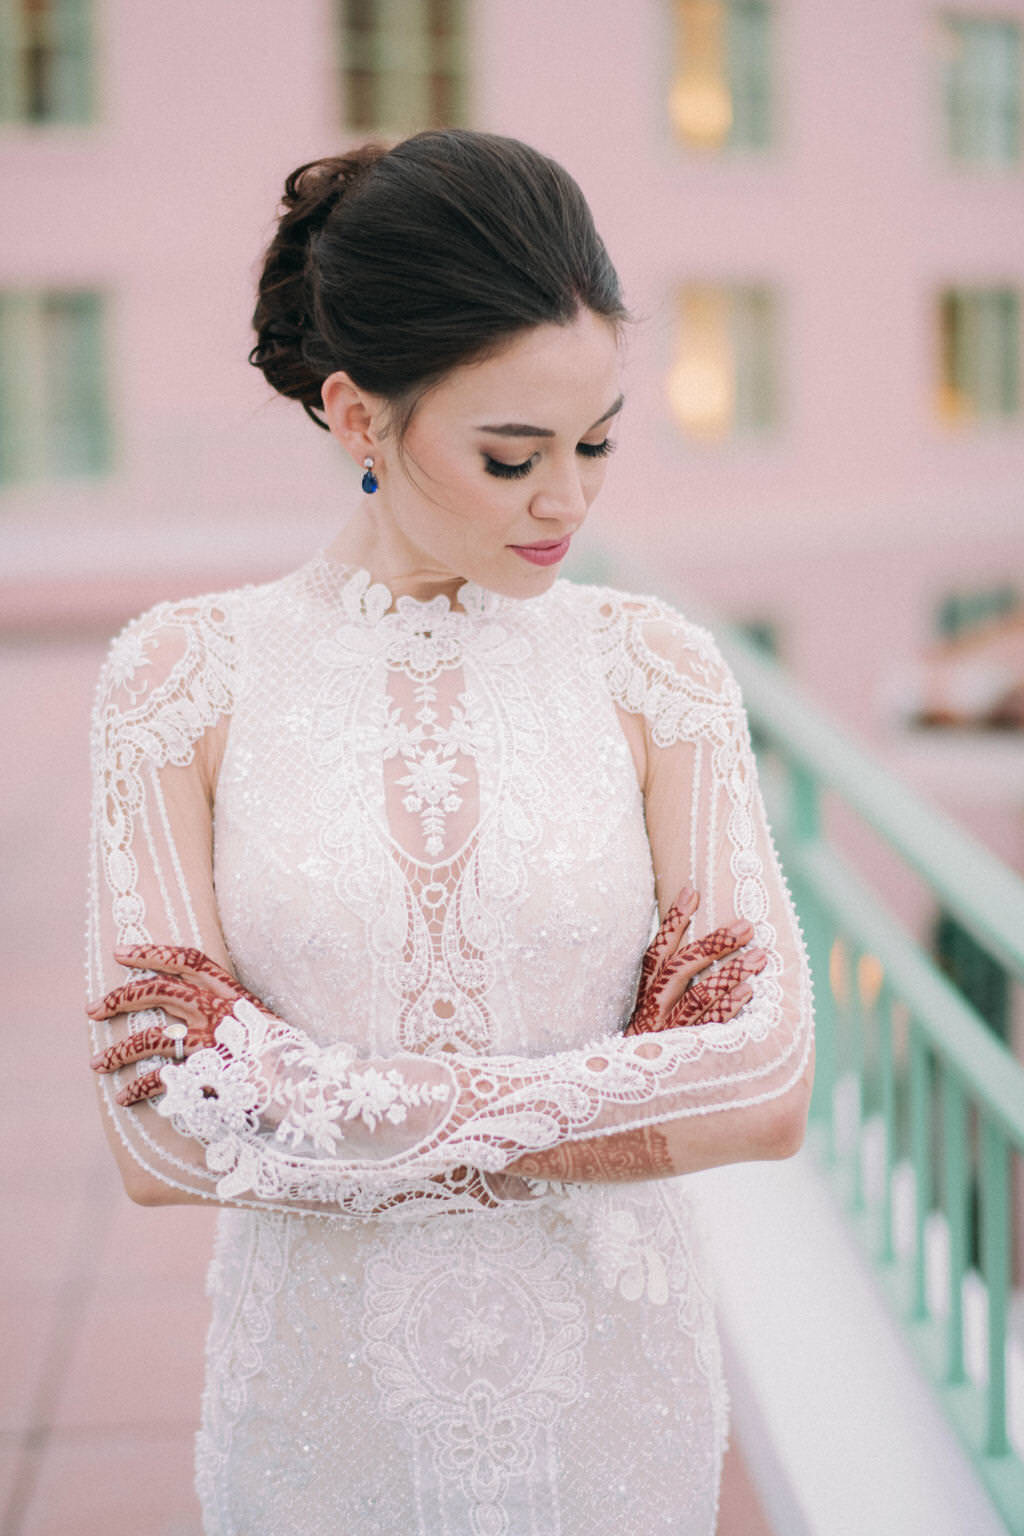 Florida Indian Bride Beauty Wedding Portrait in Floral Lace and Illusion Fitted High Neckline Long Sleeve Wedding Dress and Updo | South Tampa Couture Wedding Dress Boutique Isabel O'Neil Bridal Collection | Galia Lahav Couture Wedding Dress | Tampa Bay Bridal Hair and Makeup Artist Michele Renee The Studio